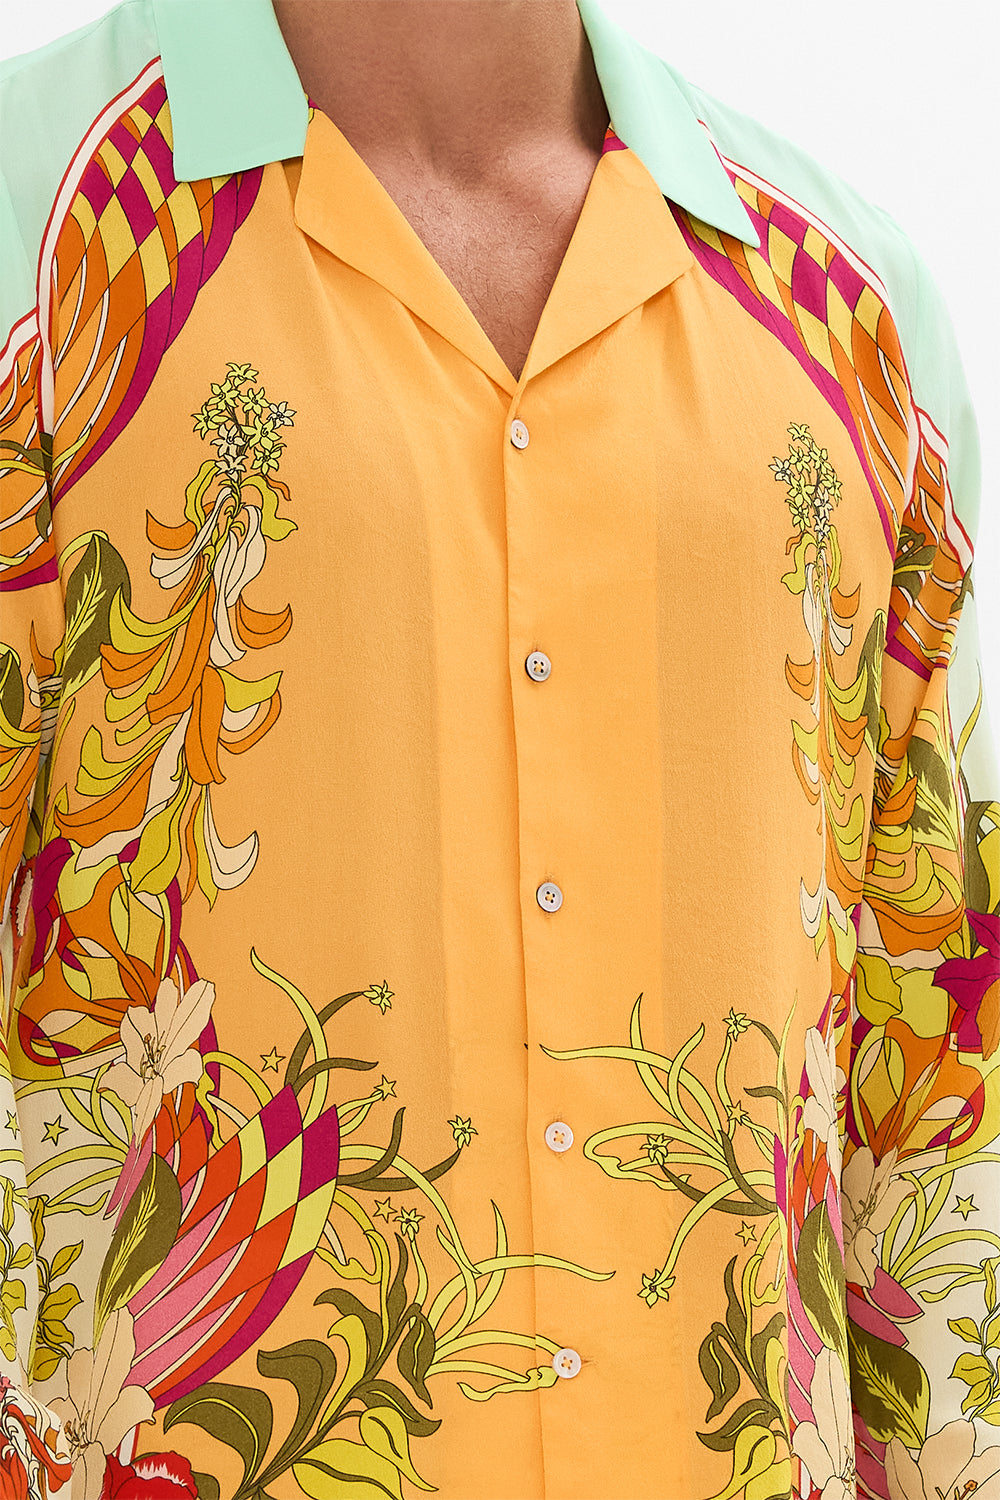 CAMILLA floral long sleeve camp collared shirt in The Flower Child Society